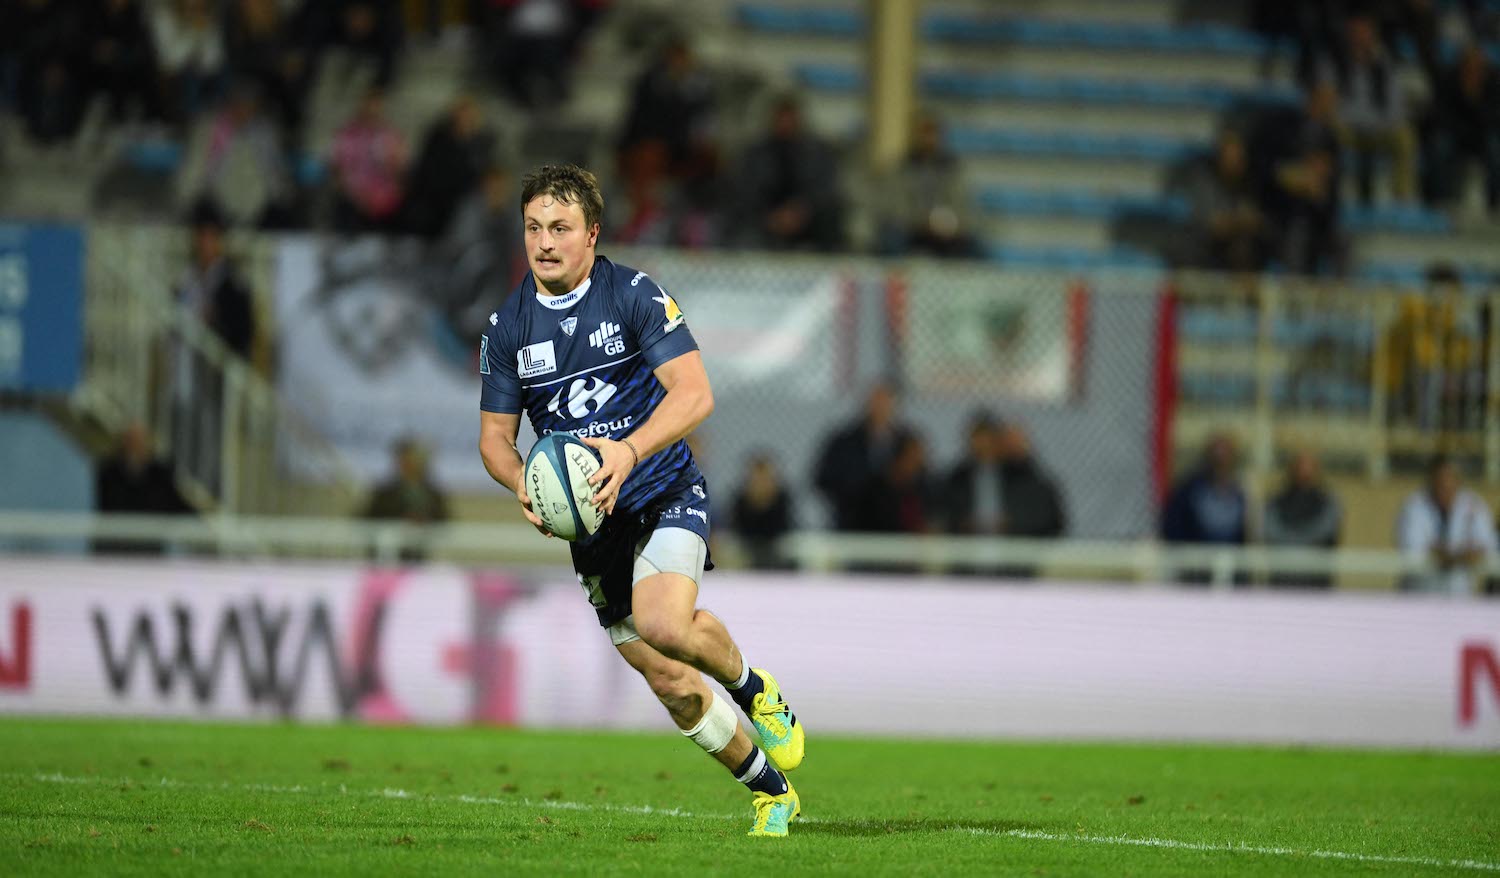 PRO D2, J16 | ROUEN NORMANDIE RUGBY - COLOMIERS RUGBY : 29-33